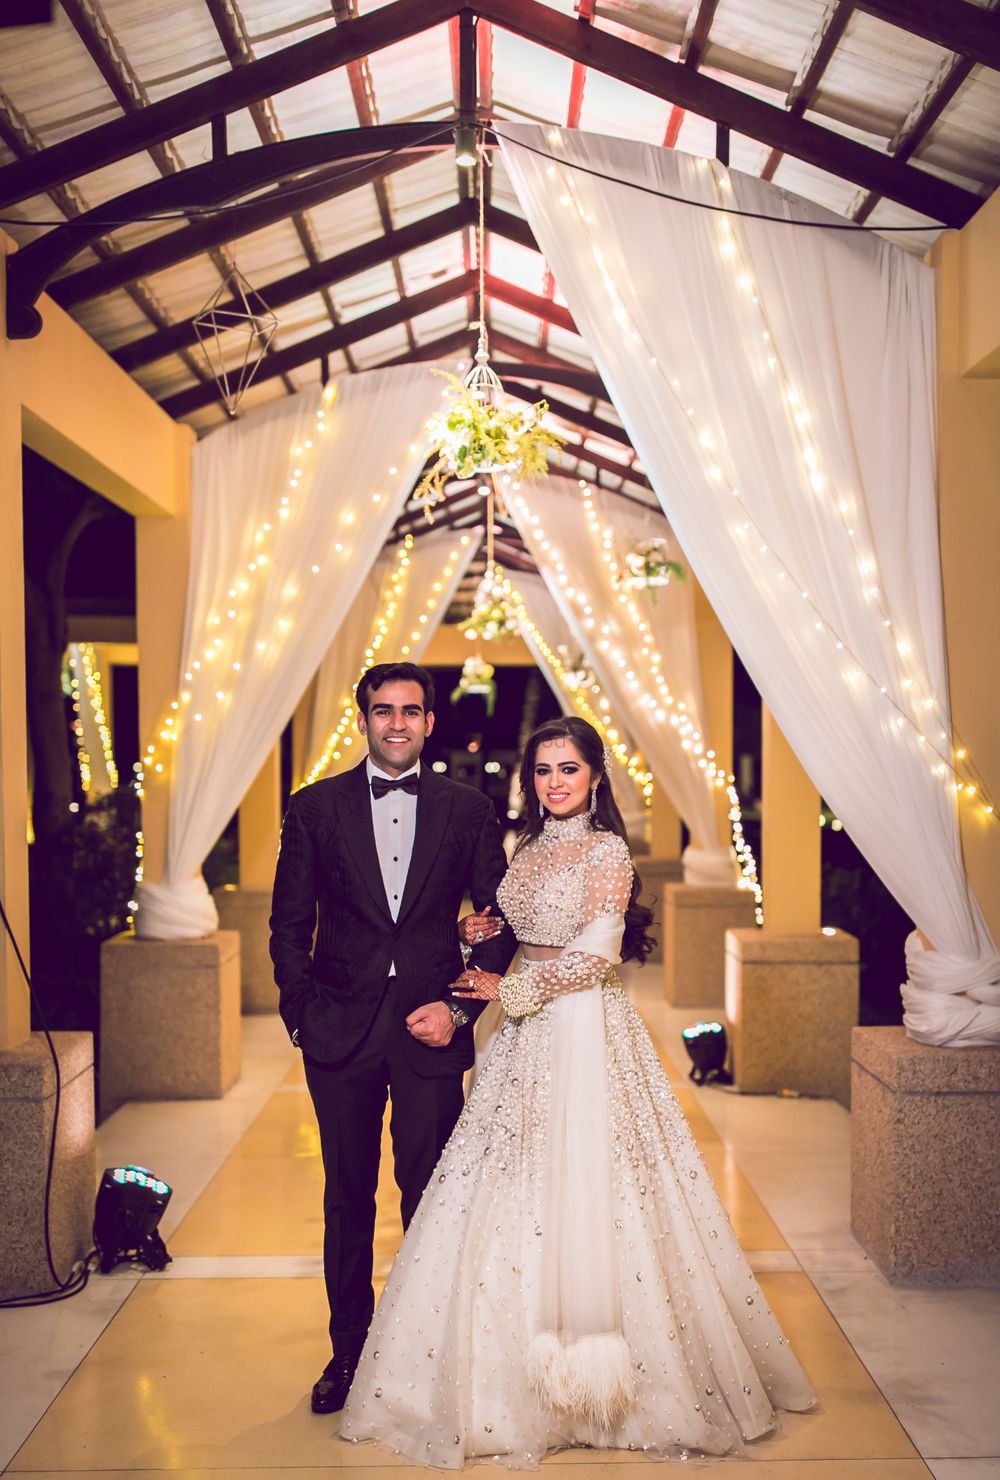 Photo of A lovely couple on their wedding amidst beautiful decor.